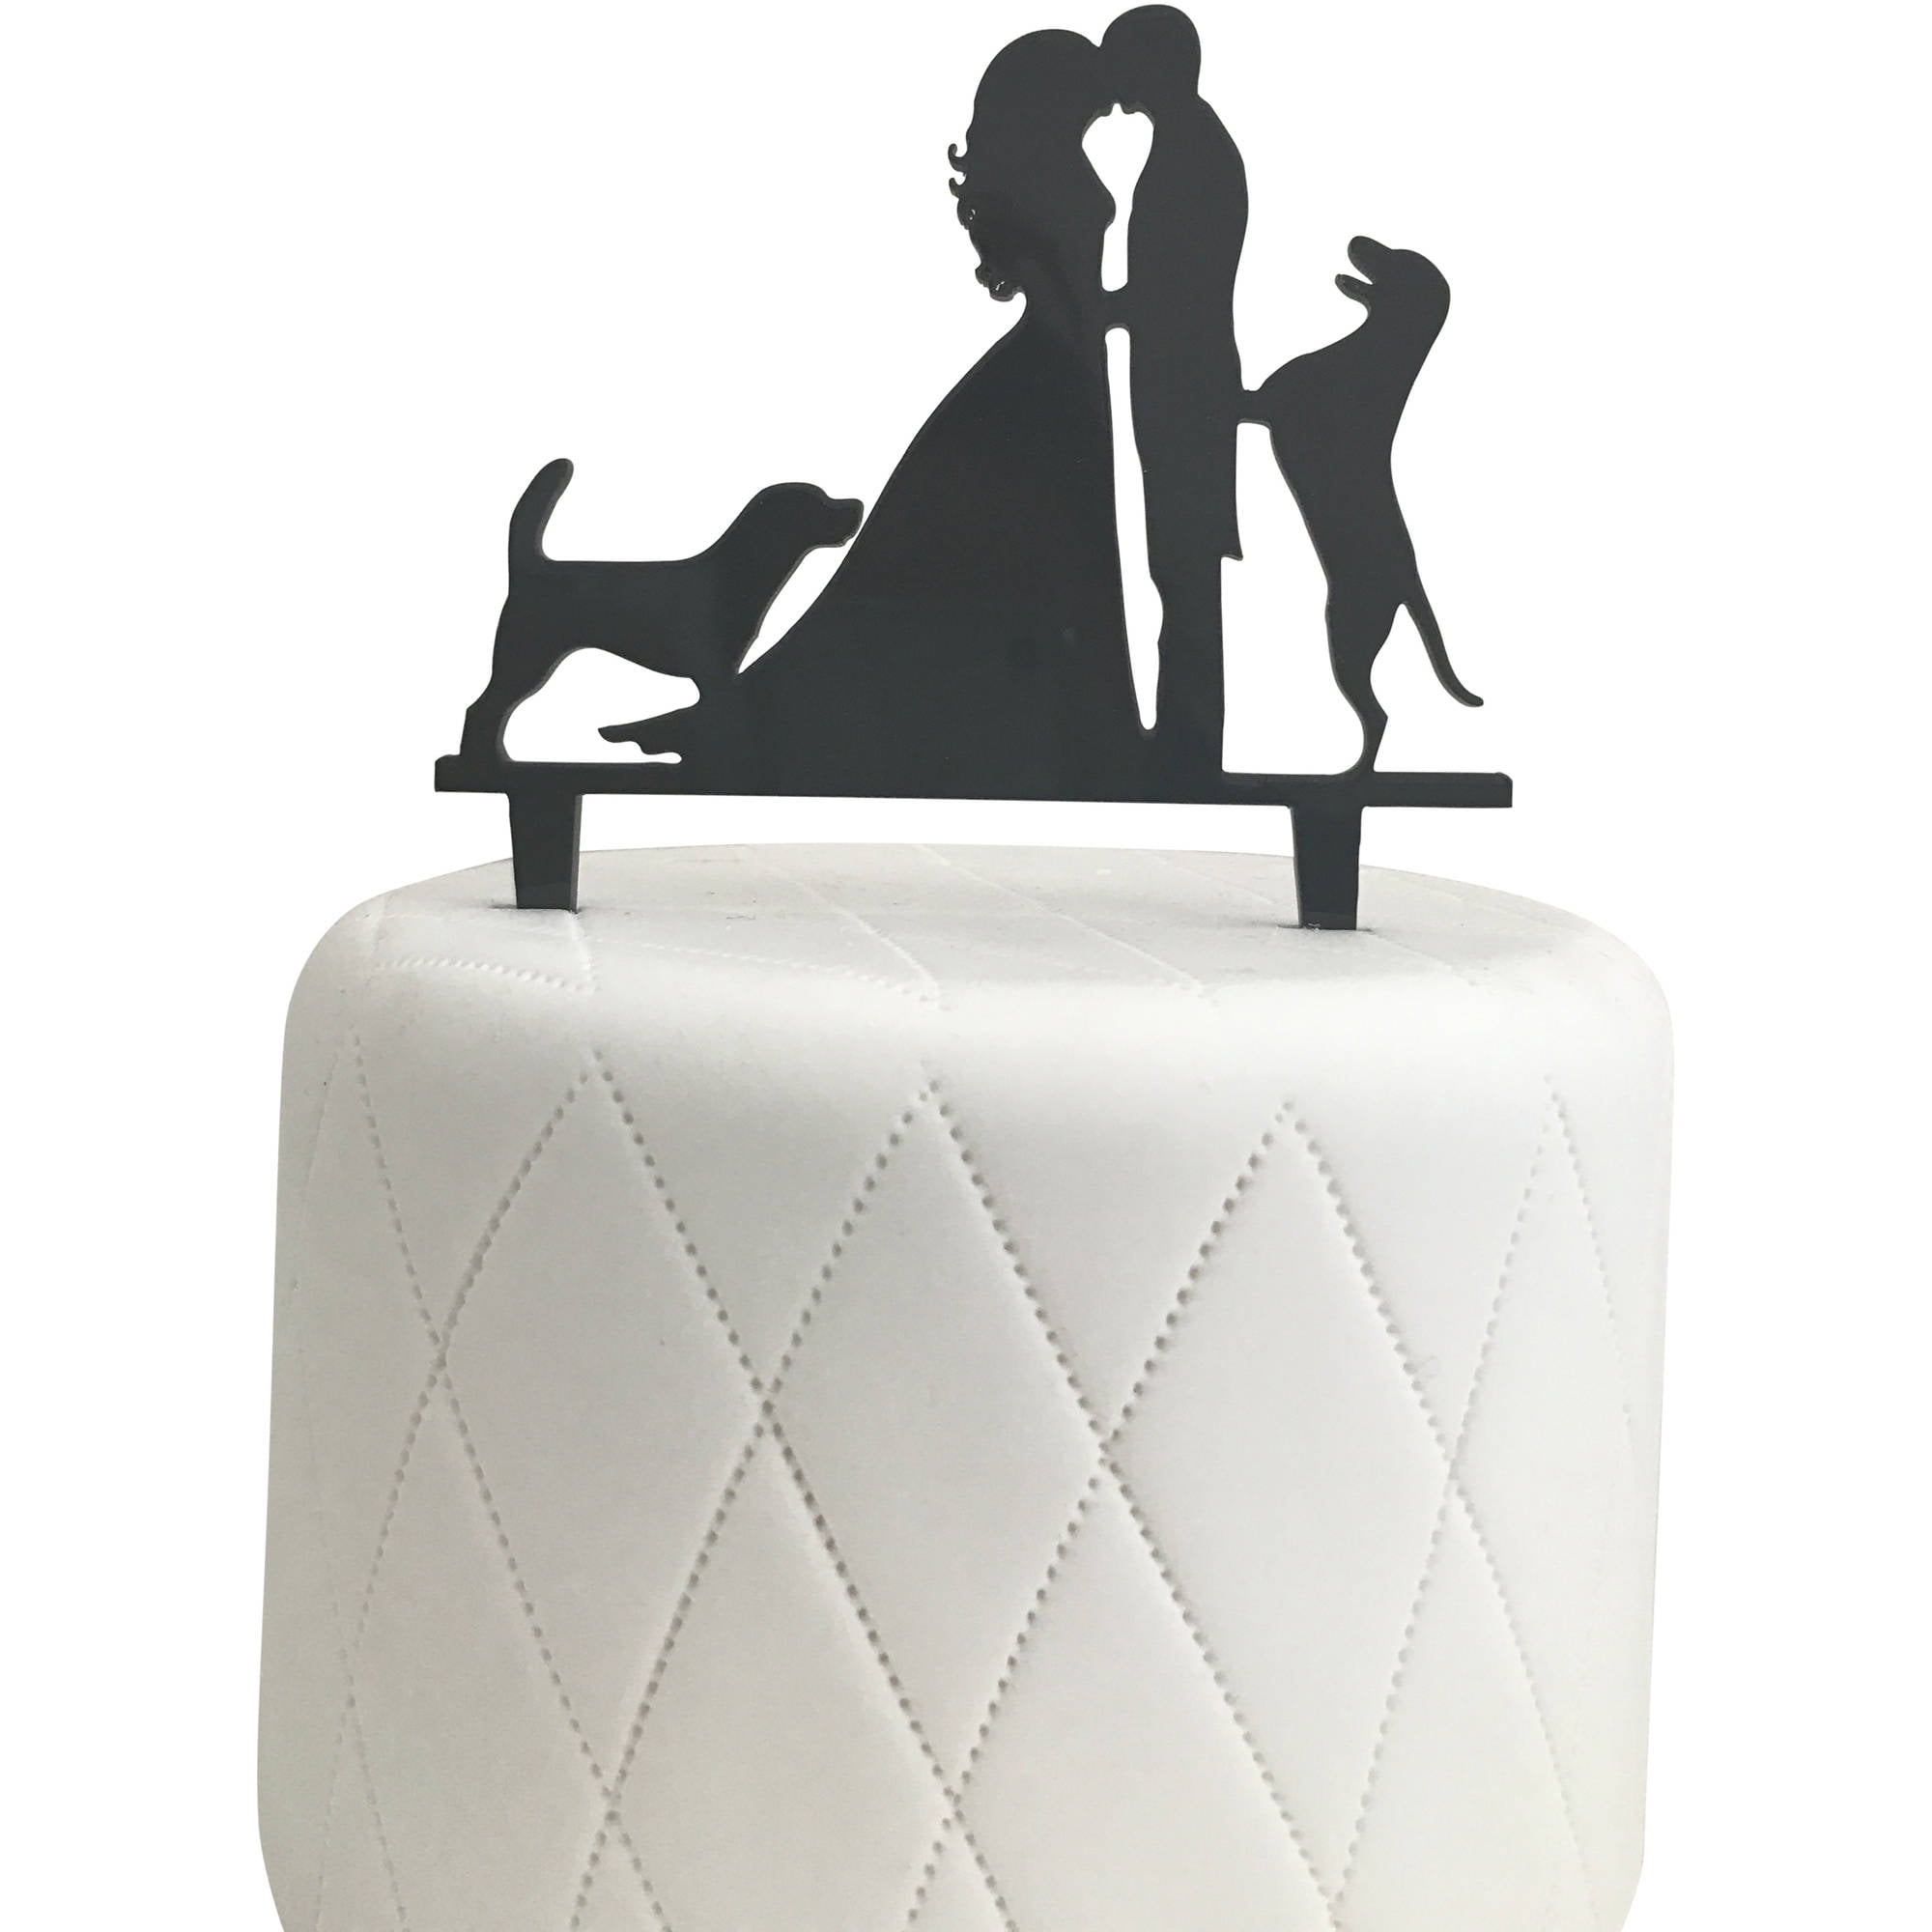 Cake Silhouette Bride and Groom with Labrador Family Cake Topper with dogs Custom Wedding Topper with Dachshund dog Couple with pets#88